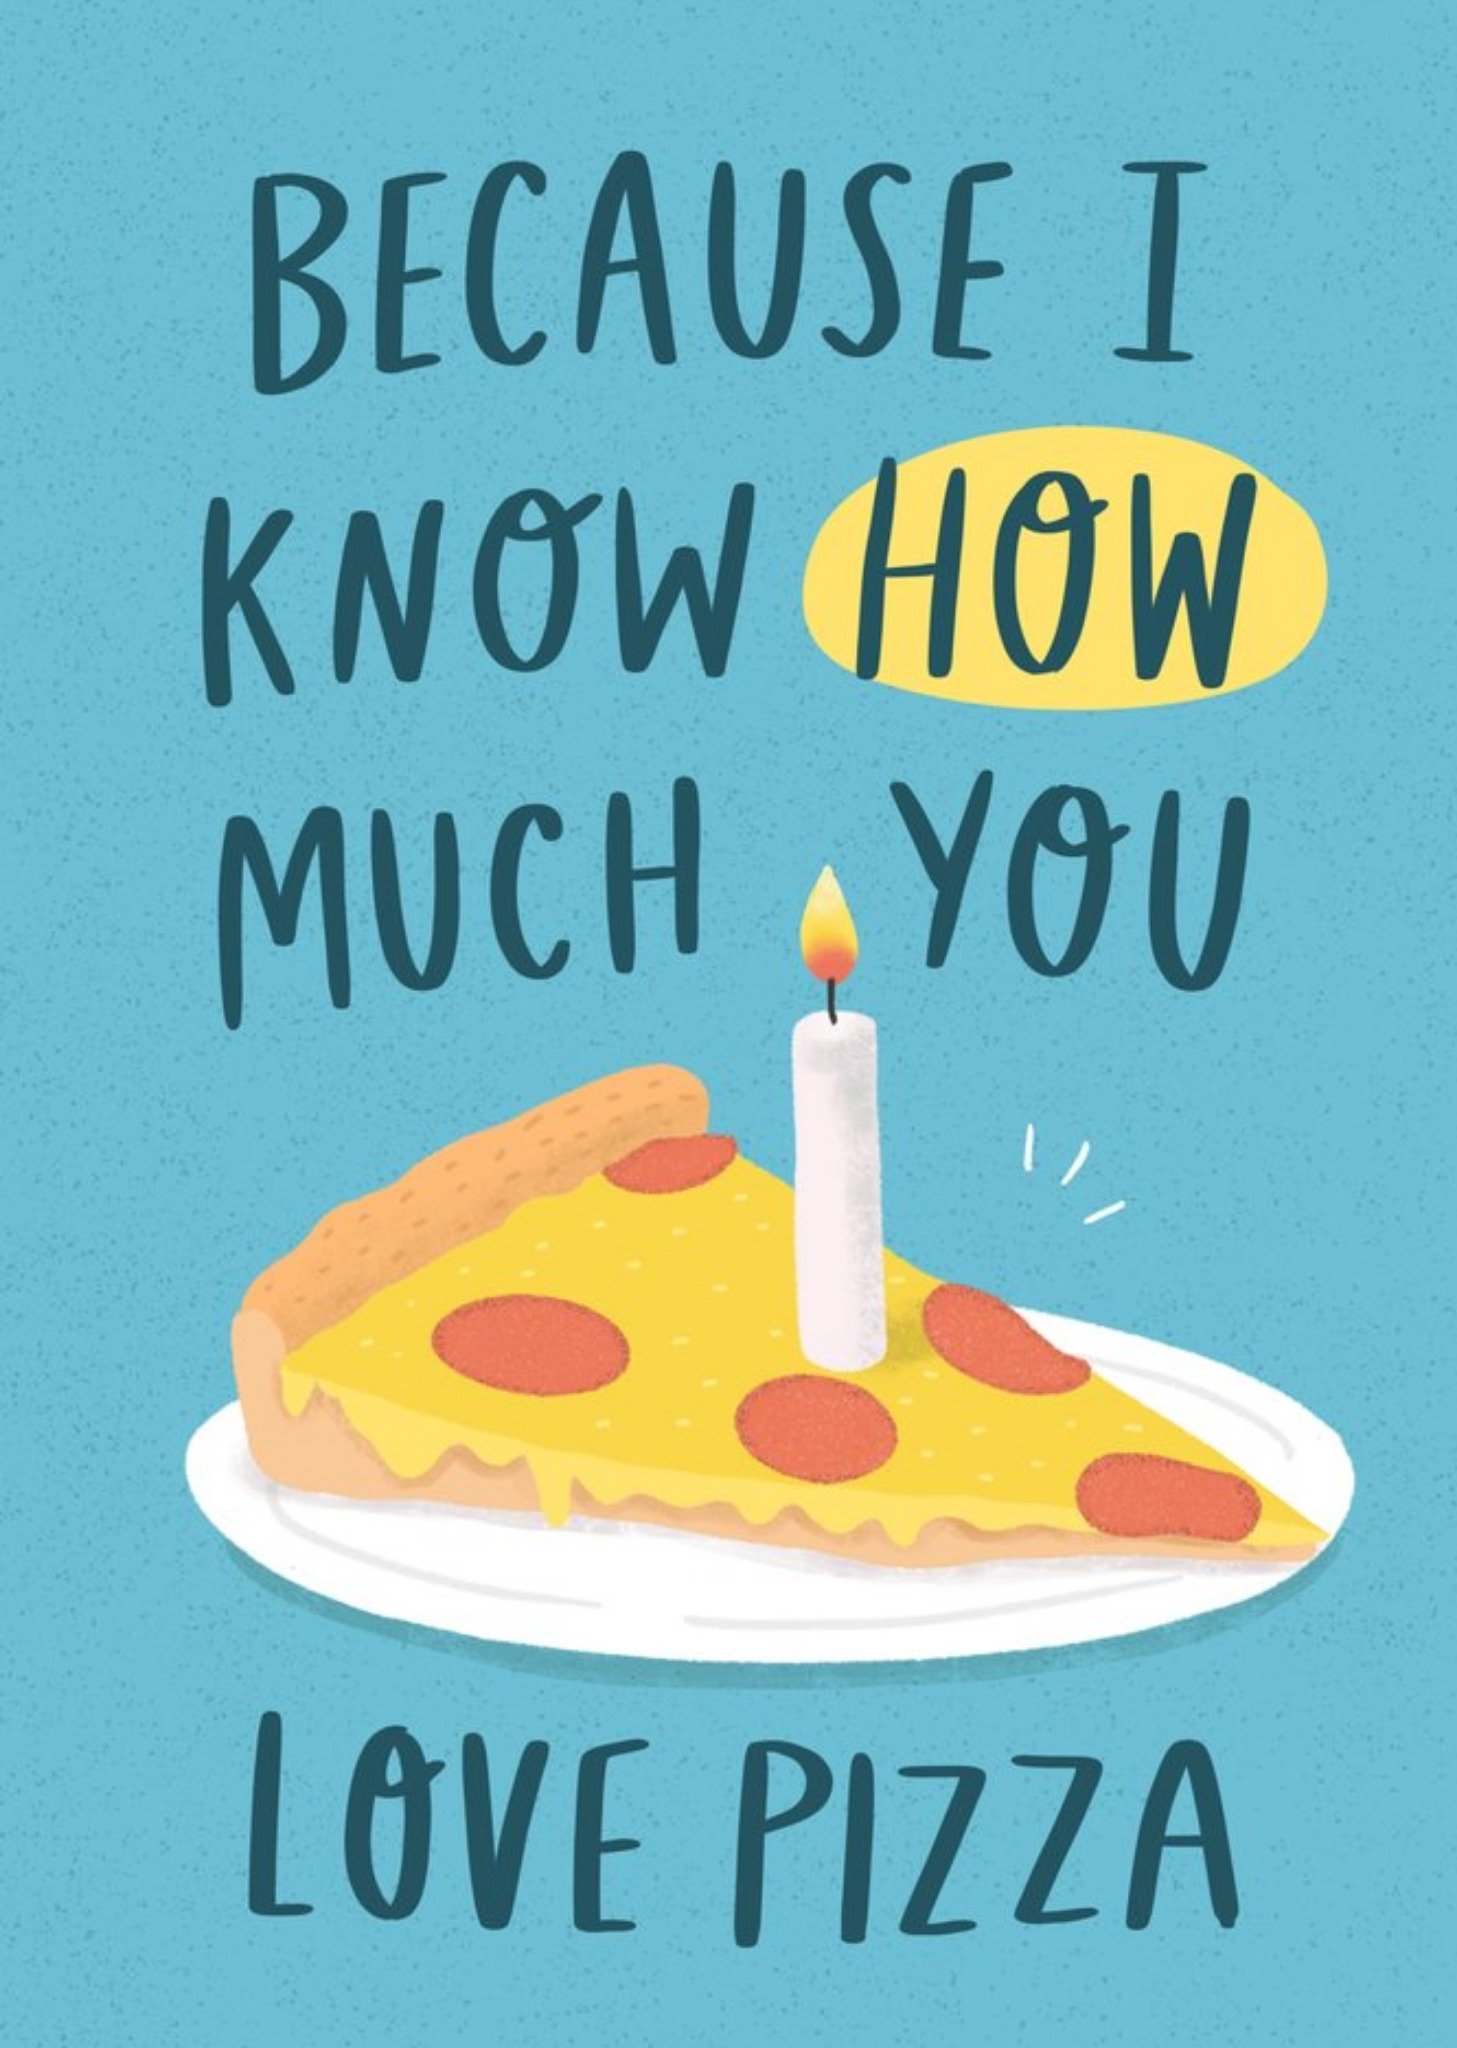 Moonpig Fun Because I Know How Much You Love Pizza Card, Large